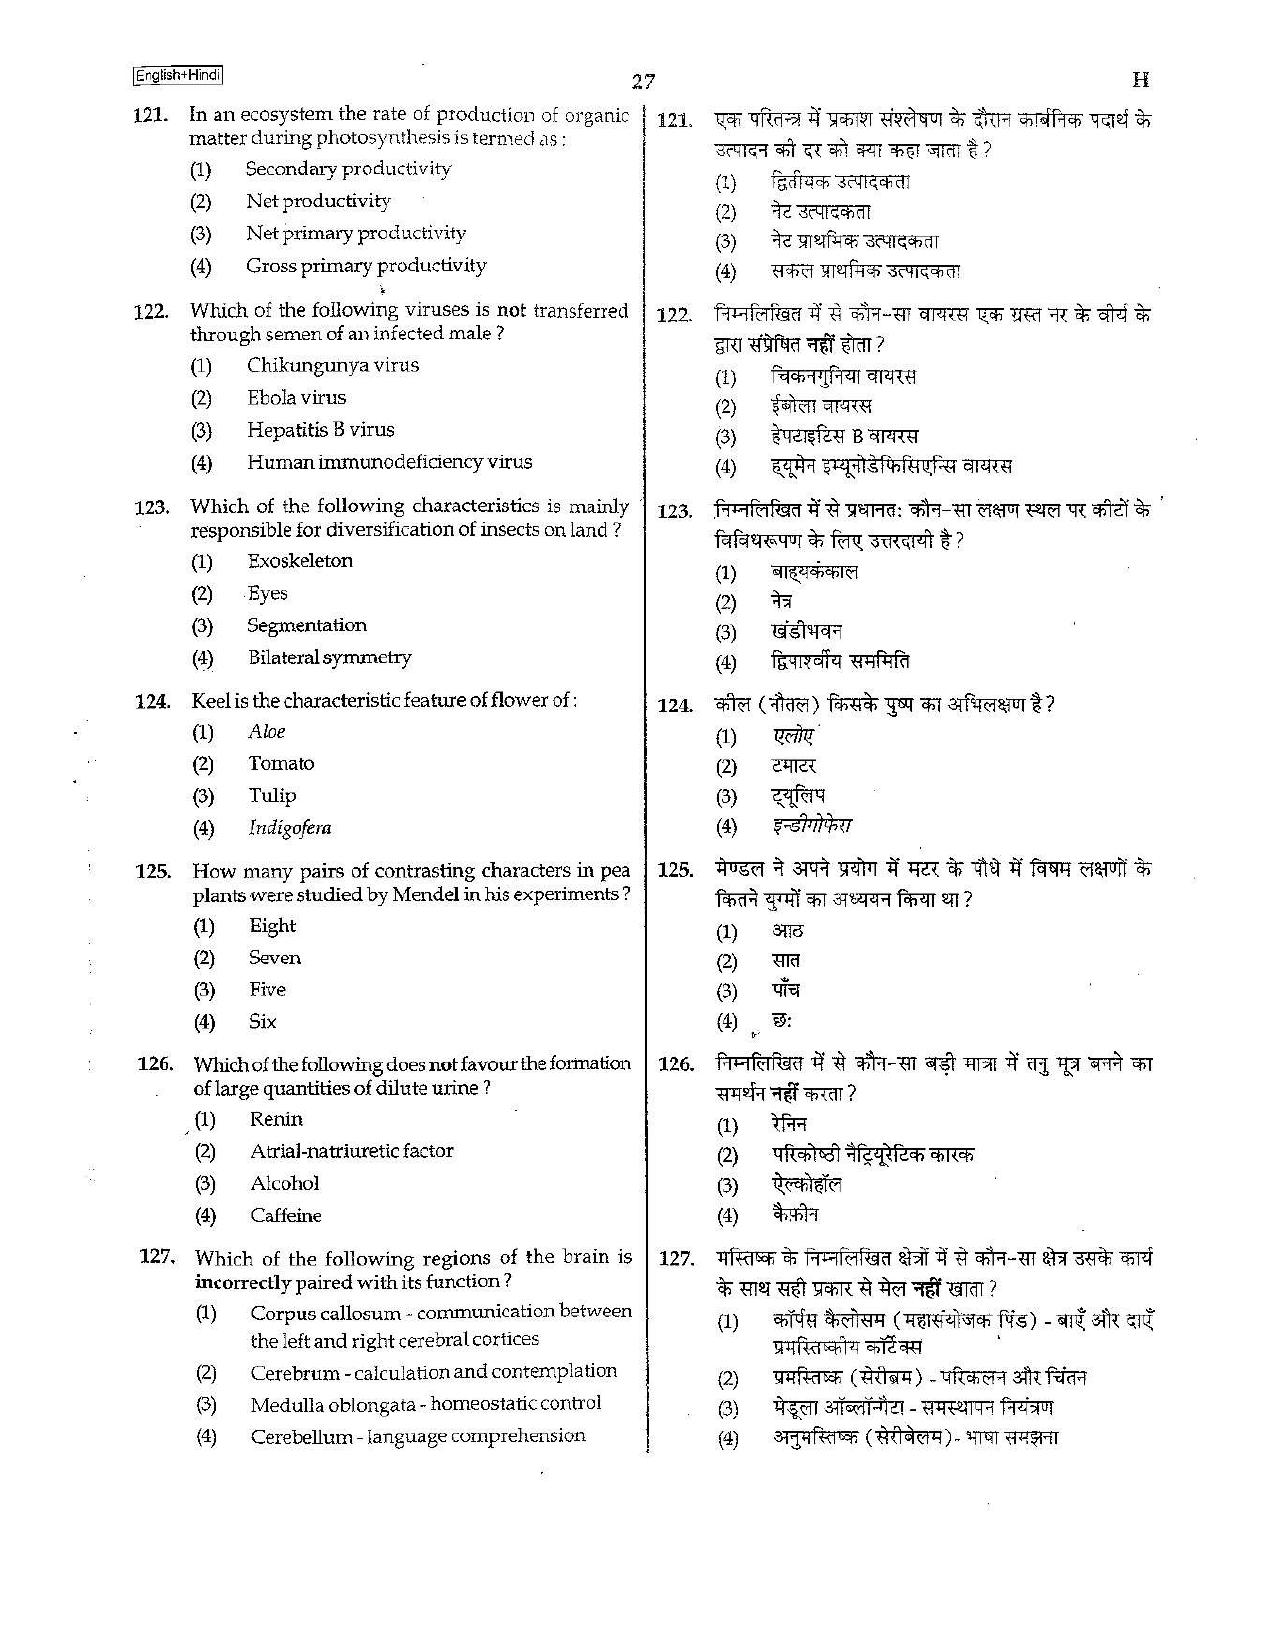 NEET Code H 2015 Question Paper - Page 27